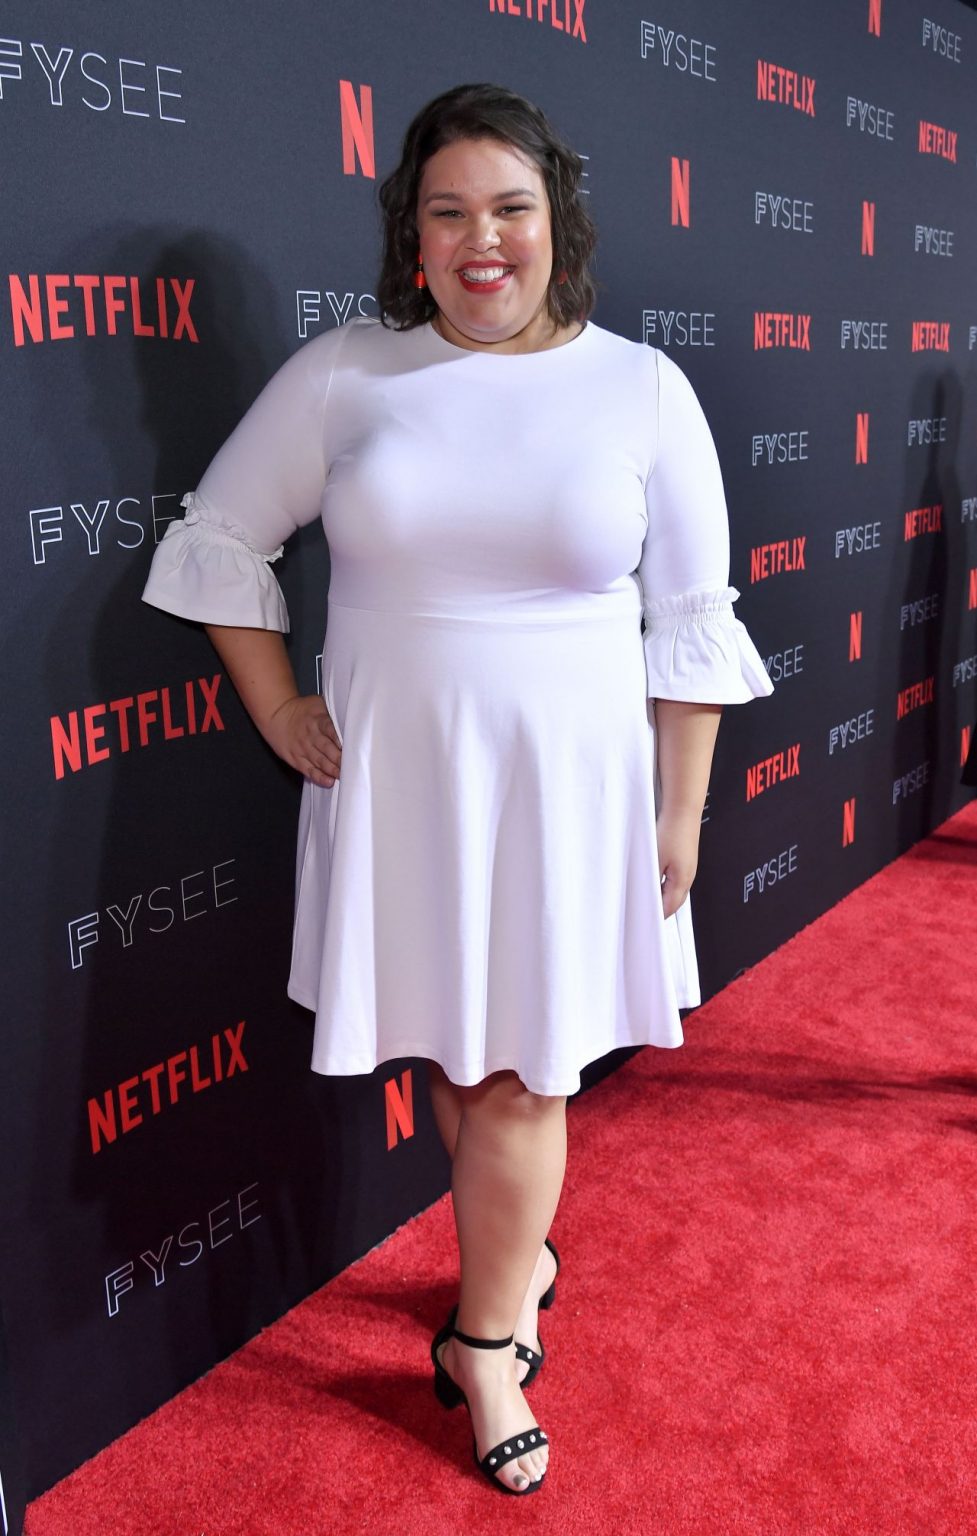 Britney Young is an American actress known for her role in Netflix's GLOW